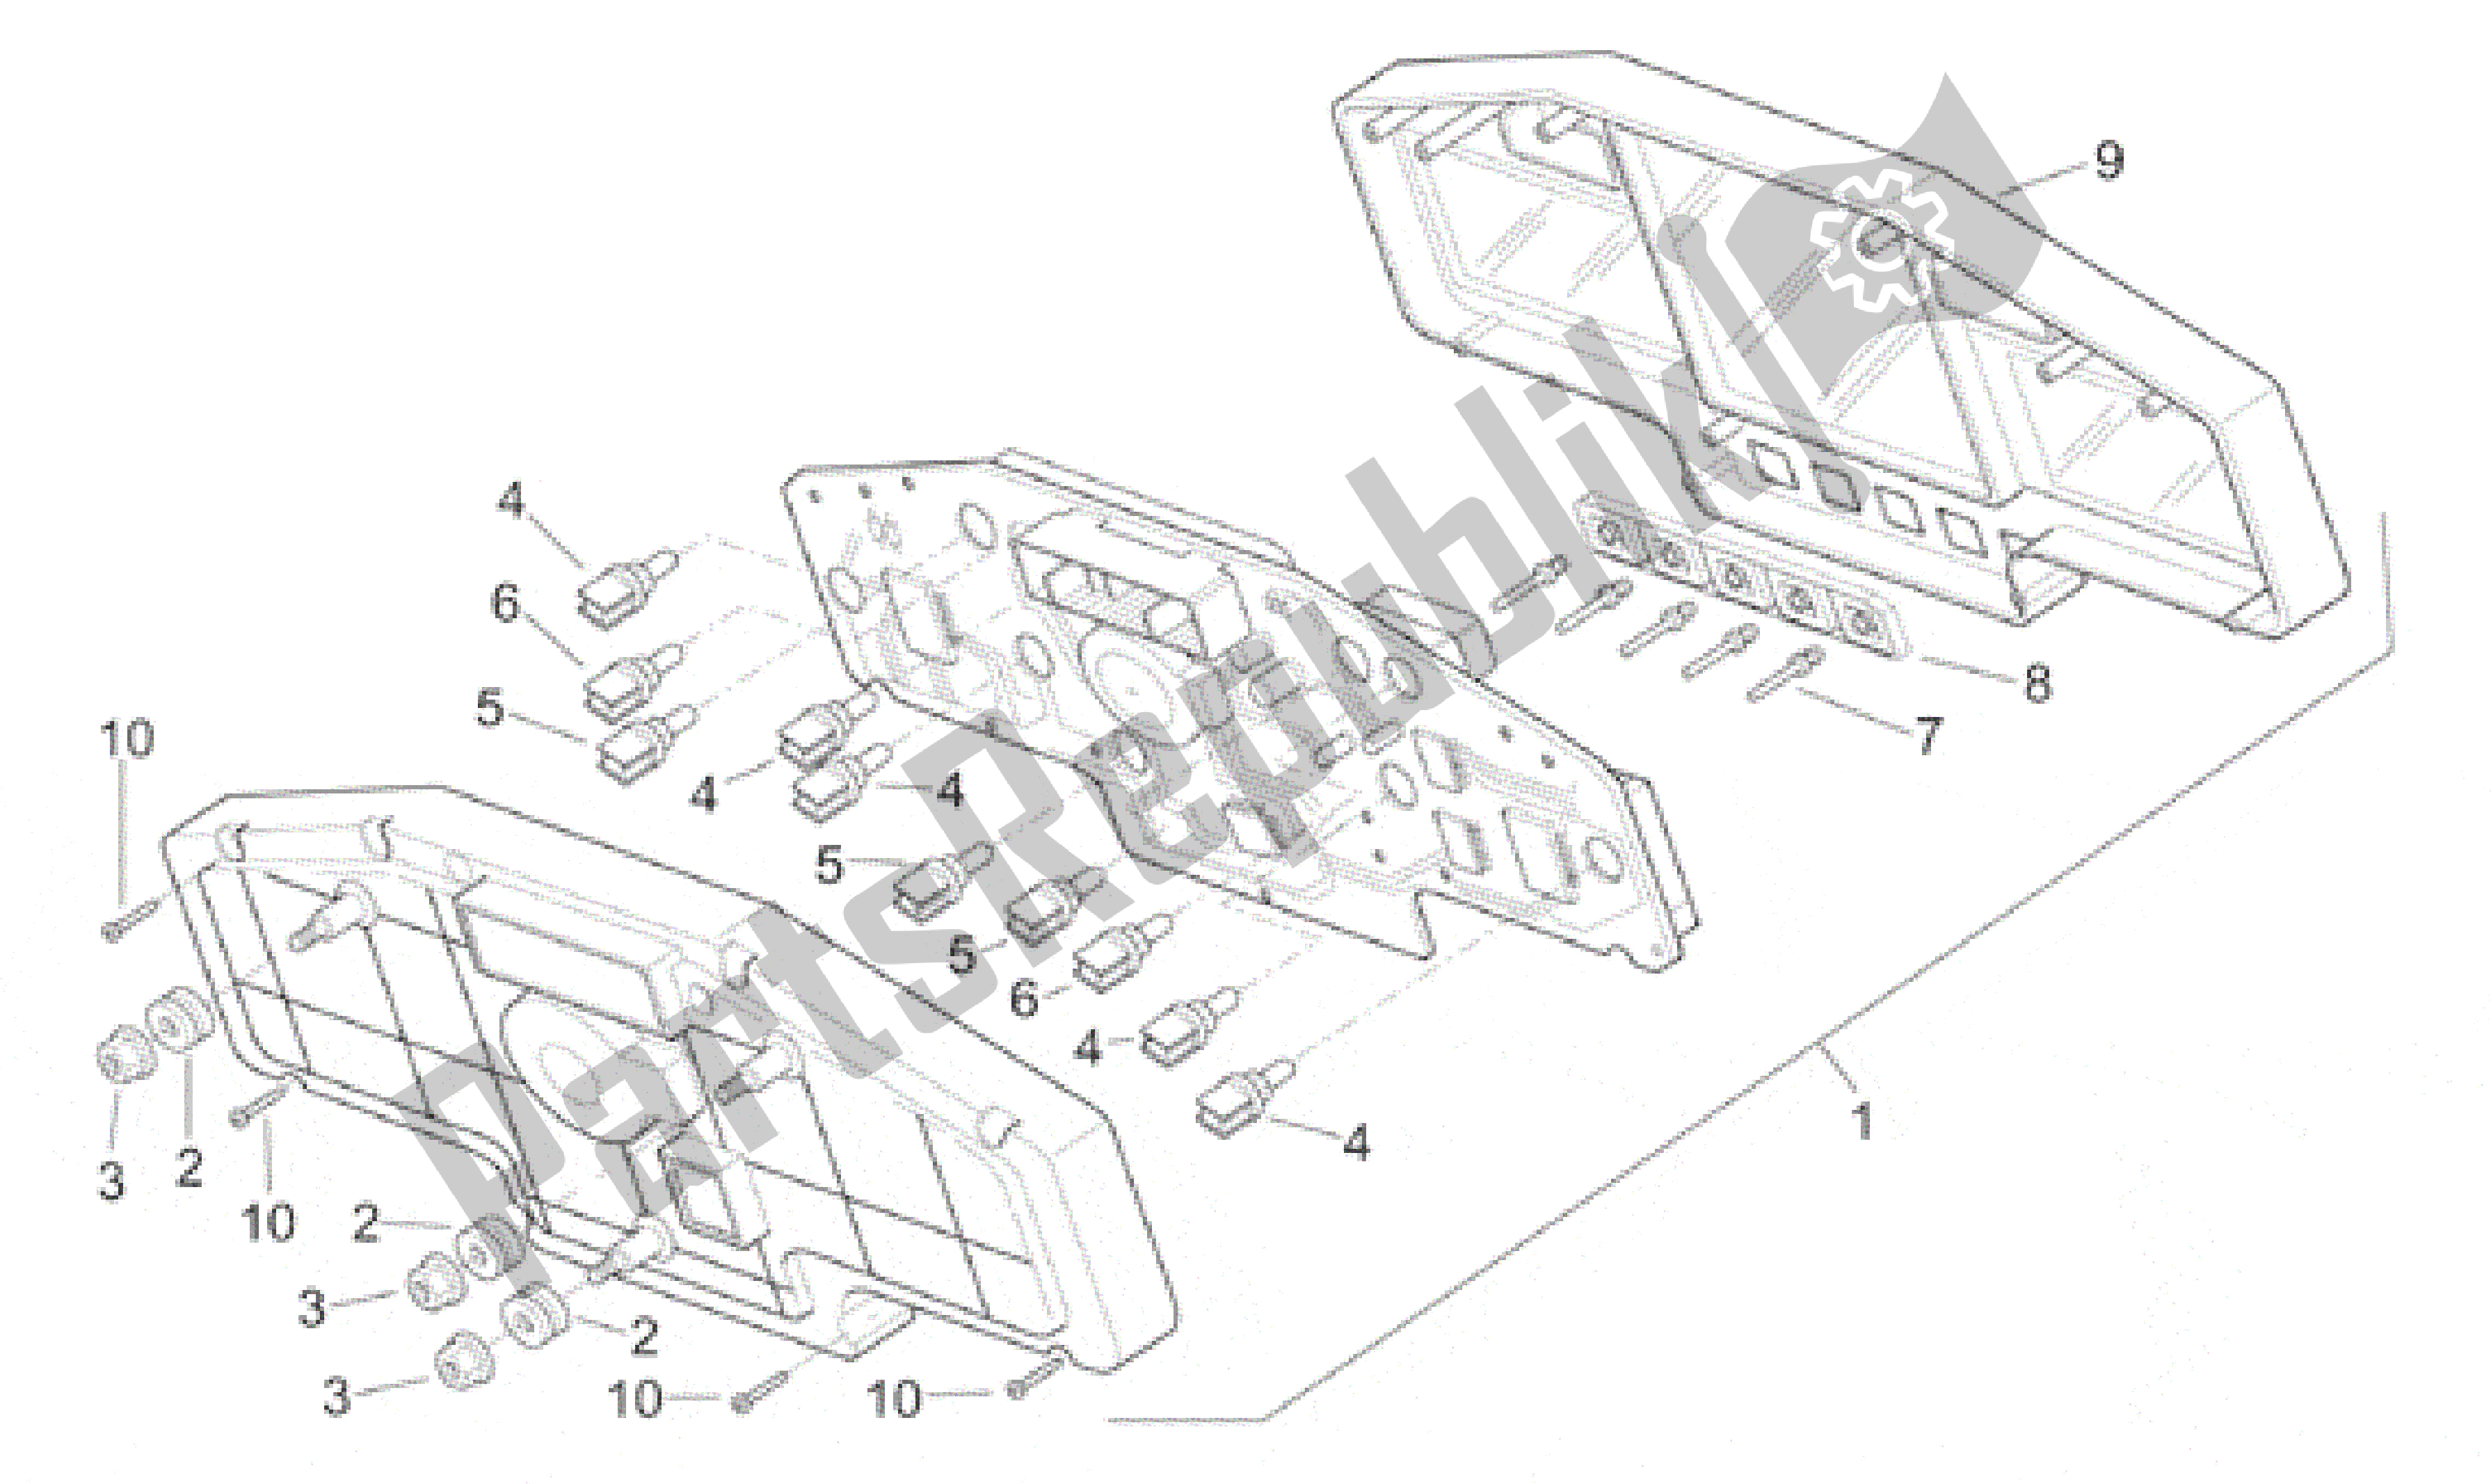 All parts for the Dashboard of the Aprilia RSV Mille SP 391 X 1000 1999 - 2000